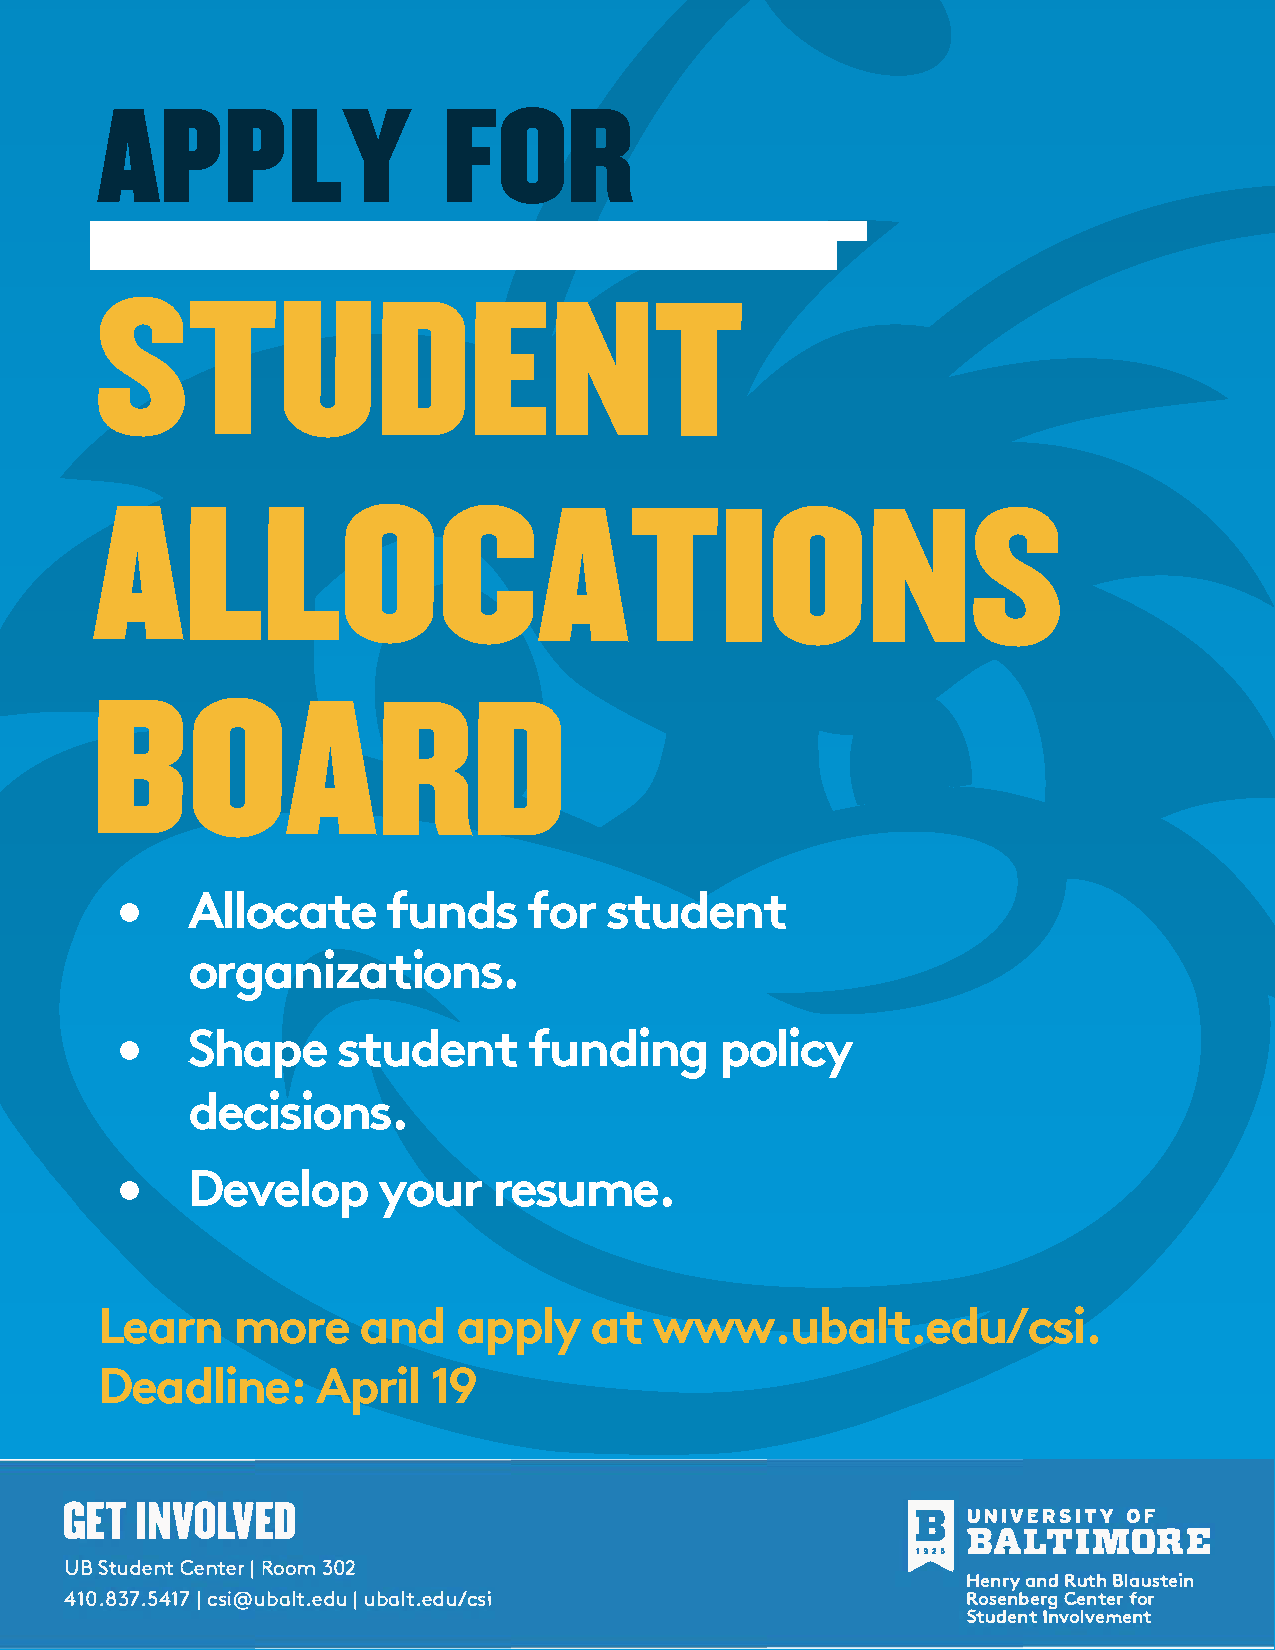 Deadline to apply for the Student Allocations Board